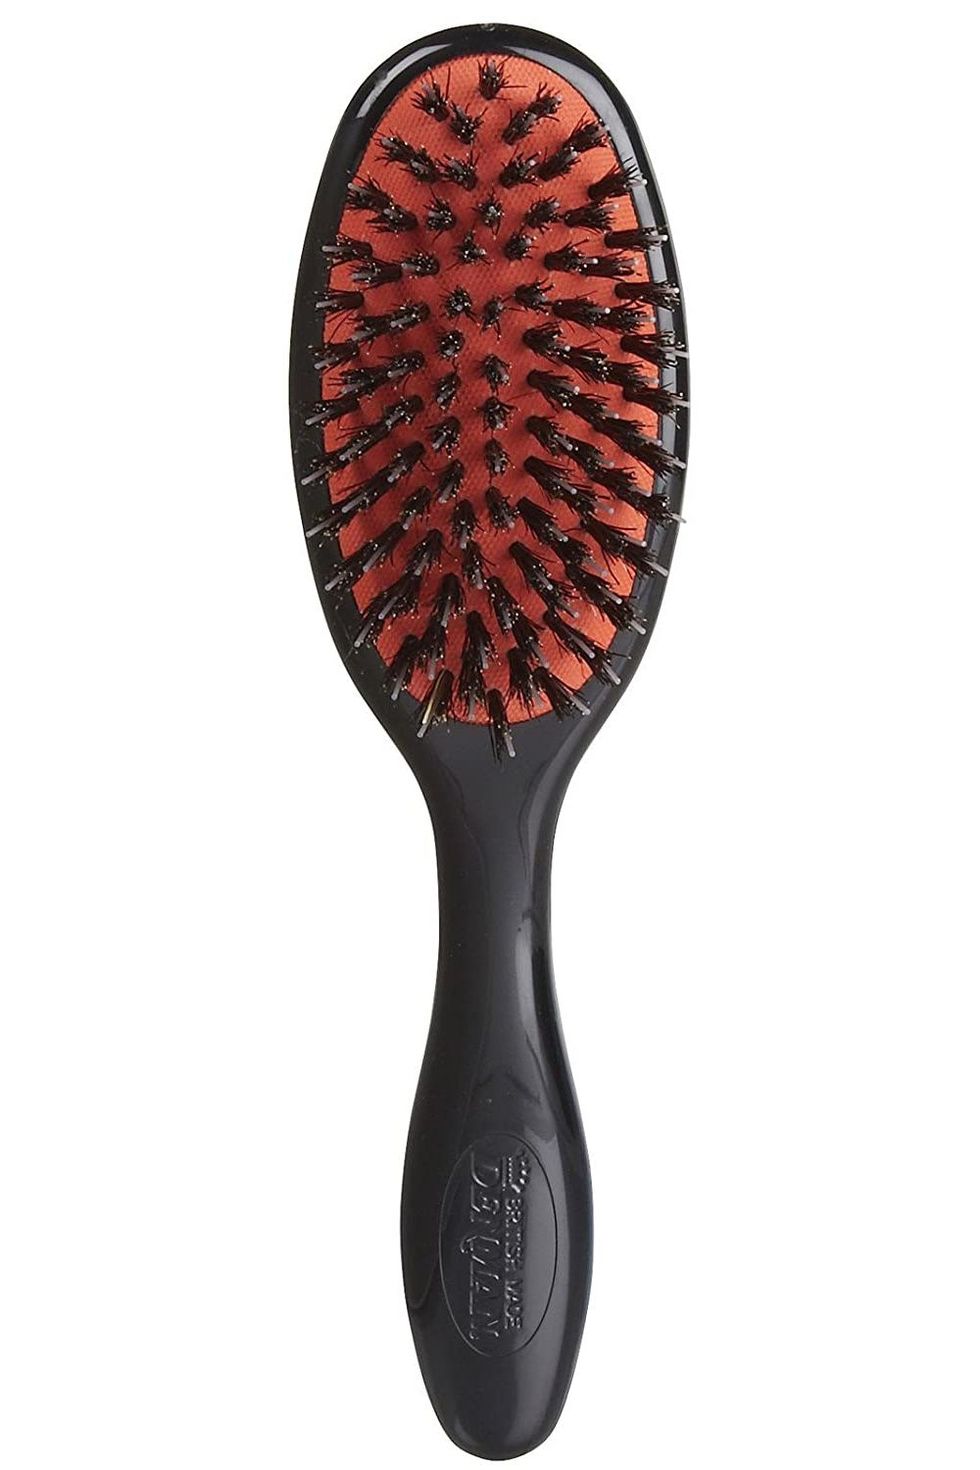 Denman D81S Small Hair Brush with Soft Nylon Quill Boar Bristles